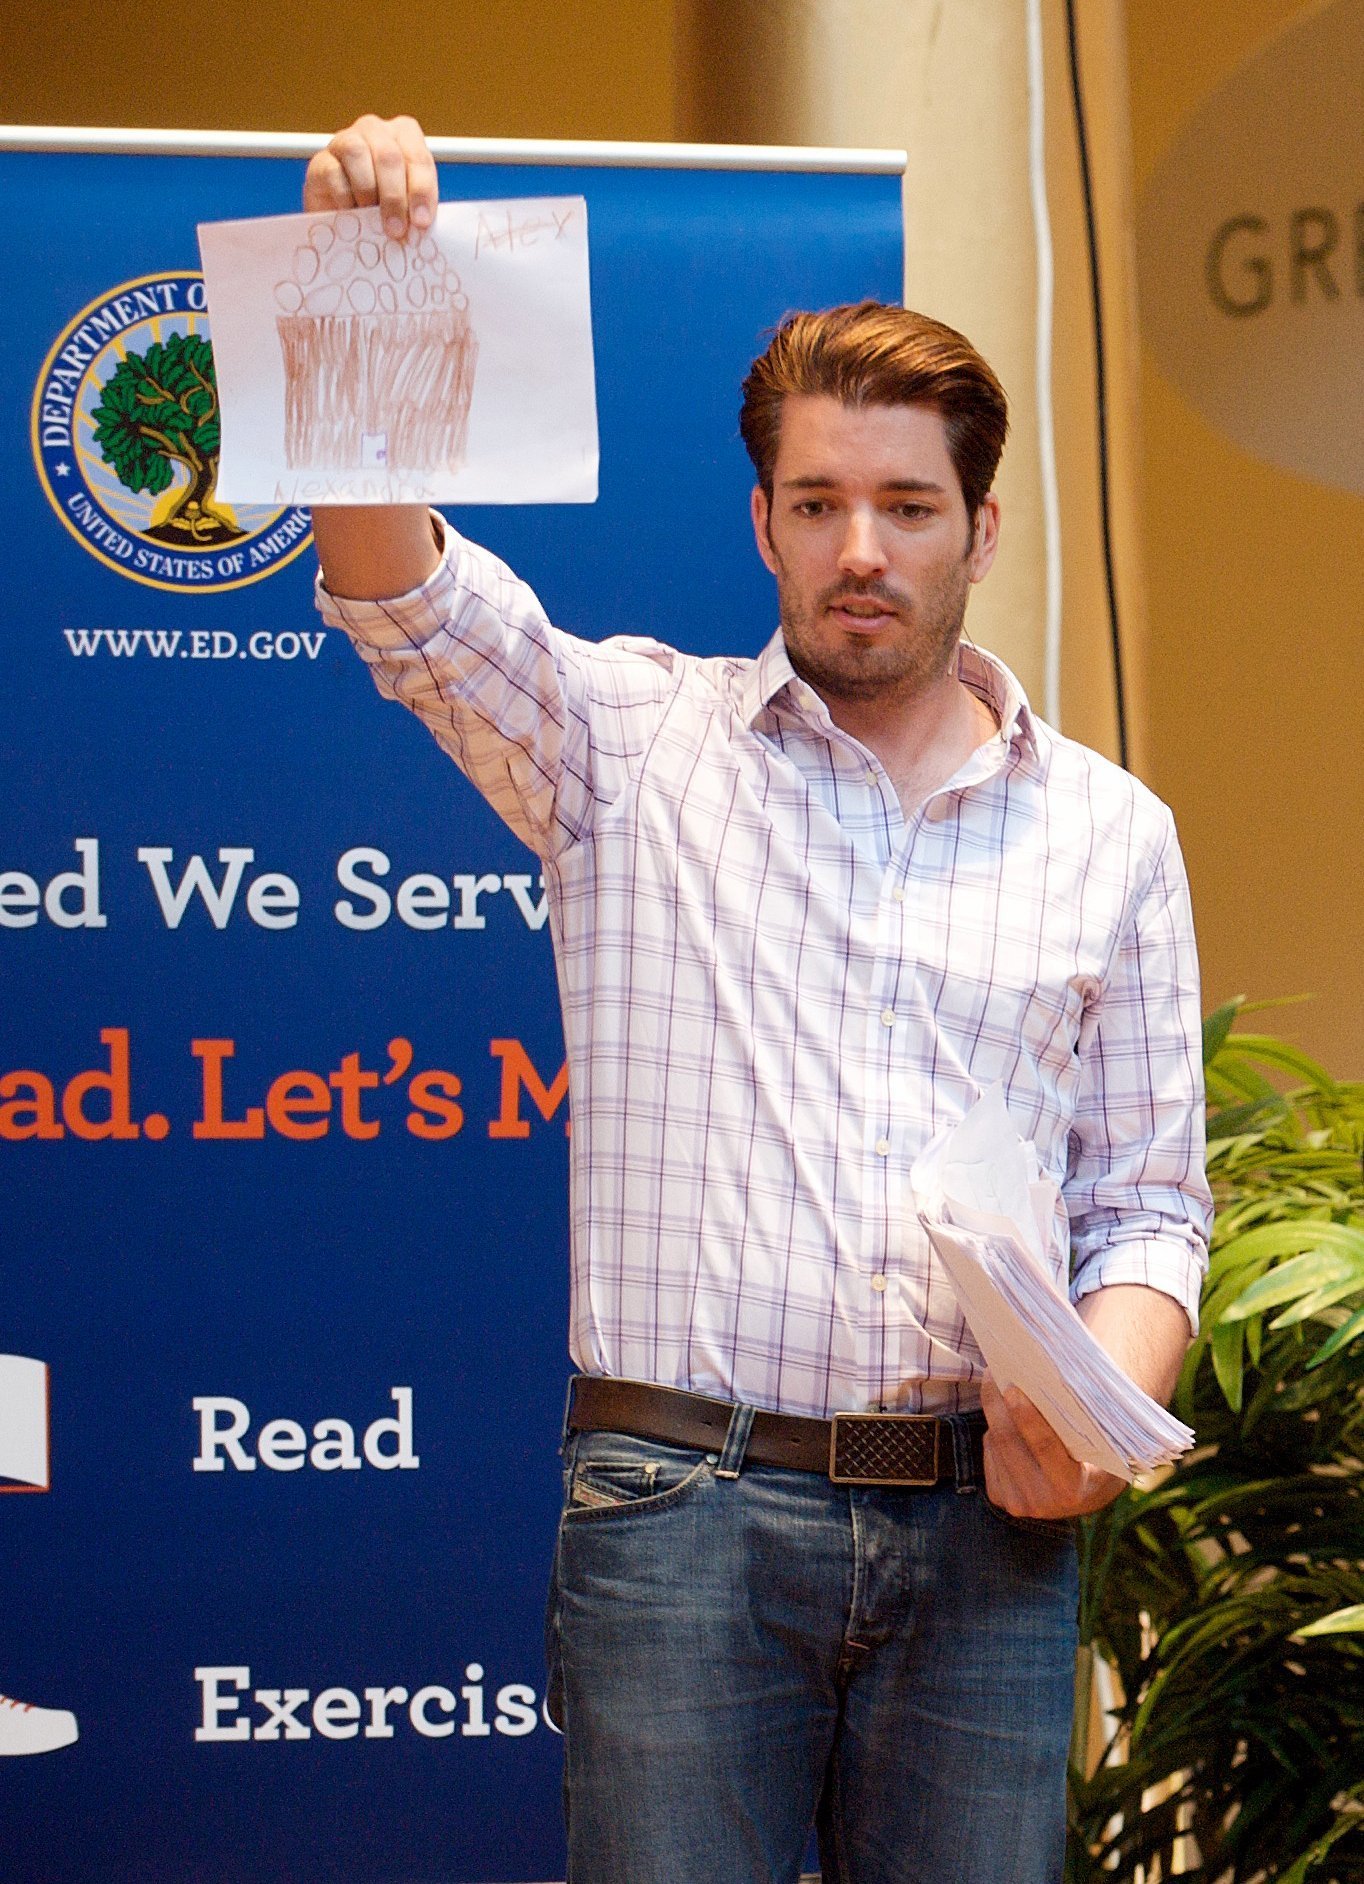 Jonathan Scott at the United We Serve Let's Read. Let's Move event on August 6, 2013. | Source: Wikimedia Commons